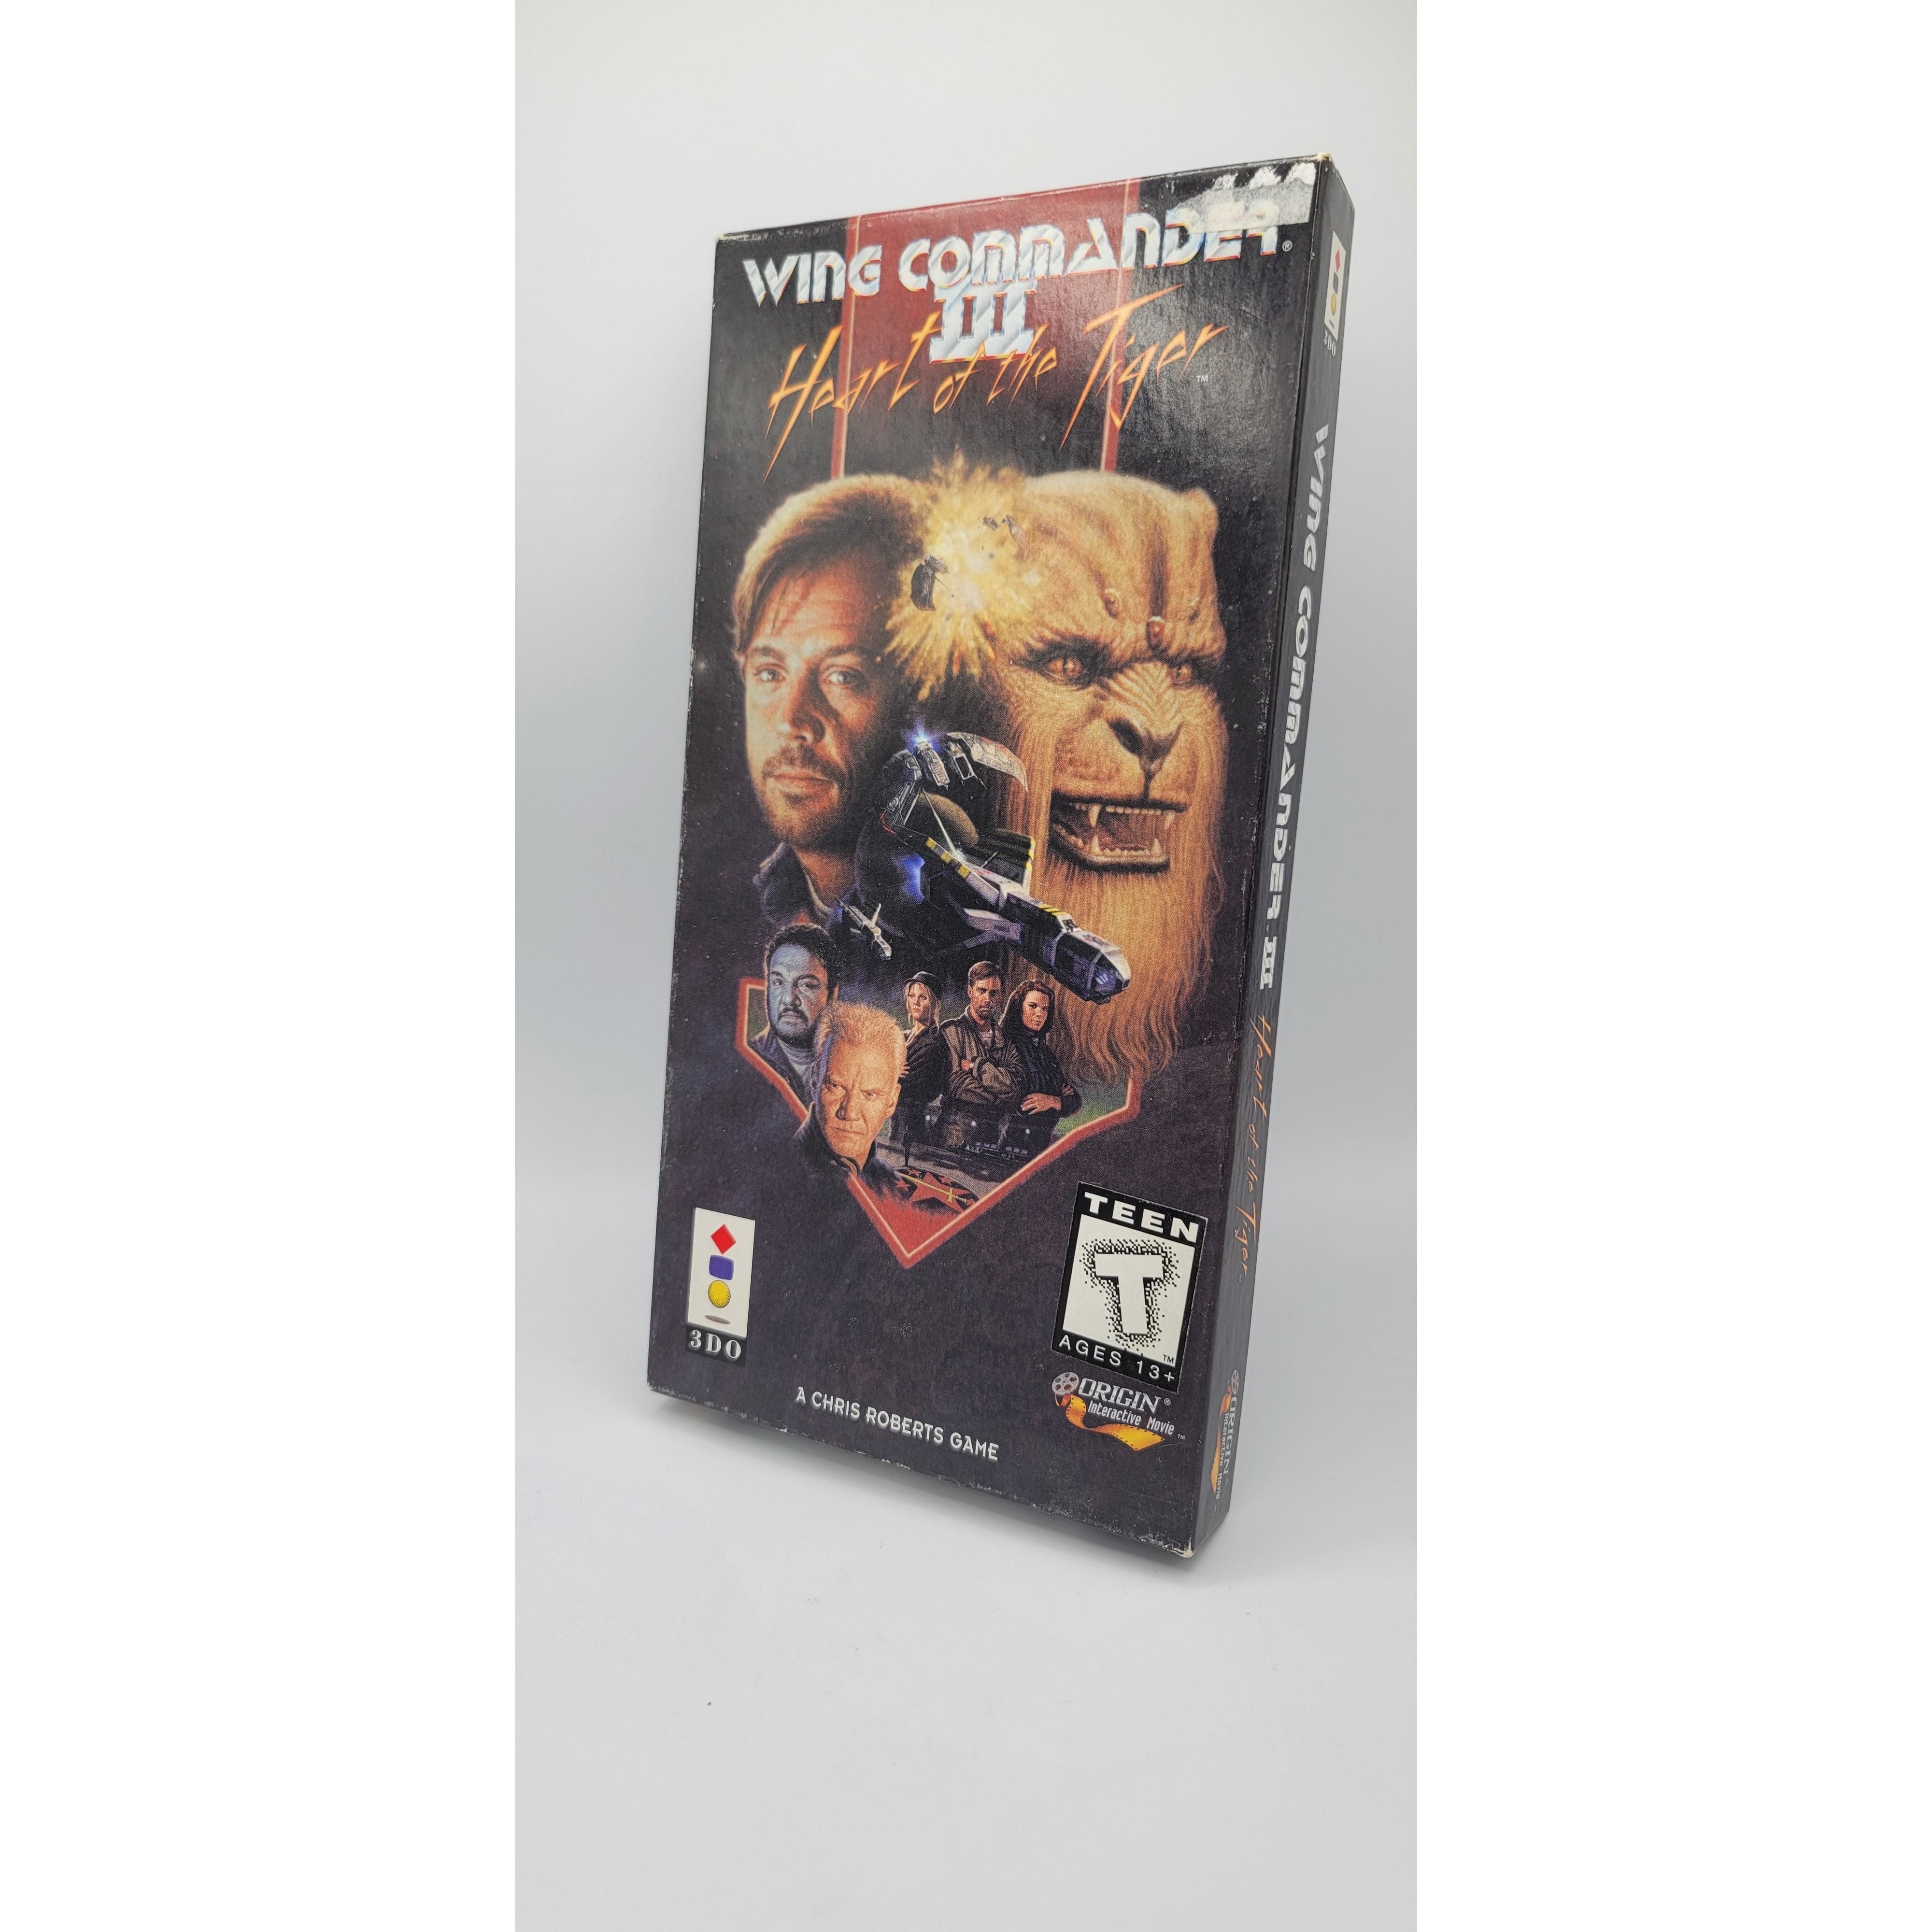 3DO - Wing Commander III Heart of the Tiger (Long Box)